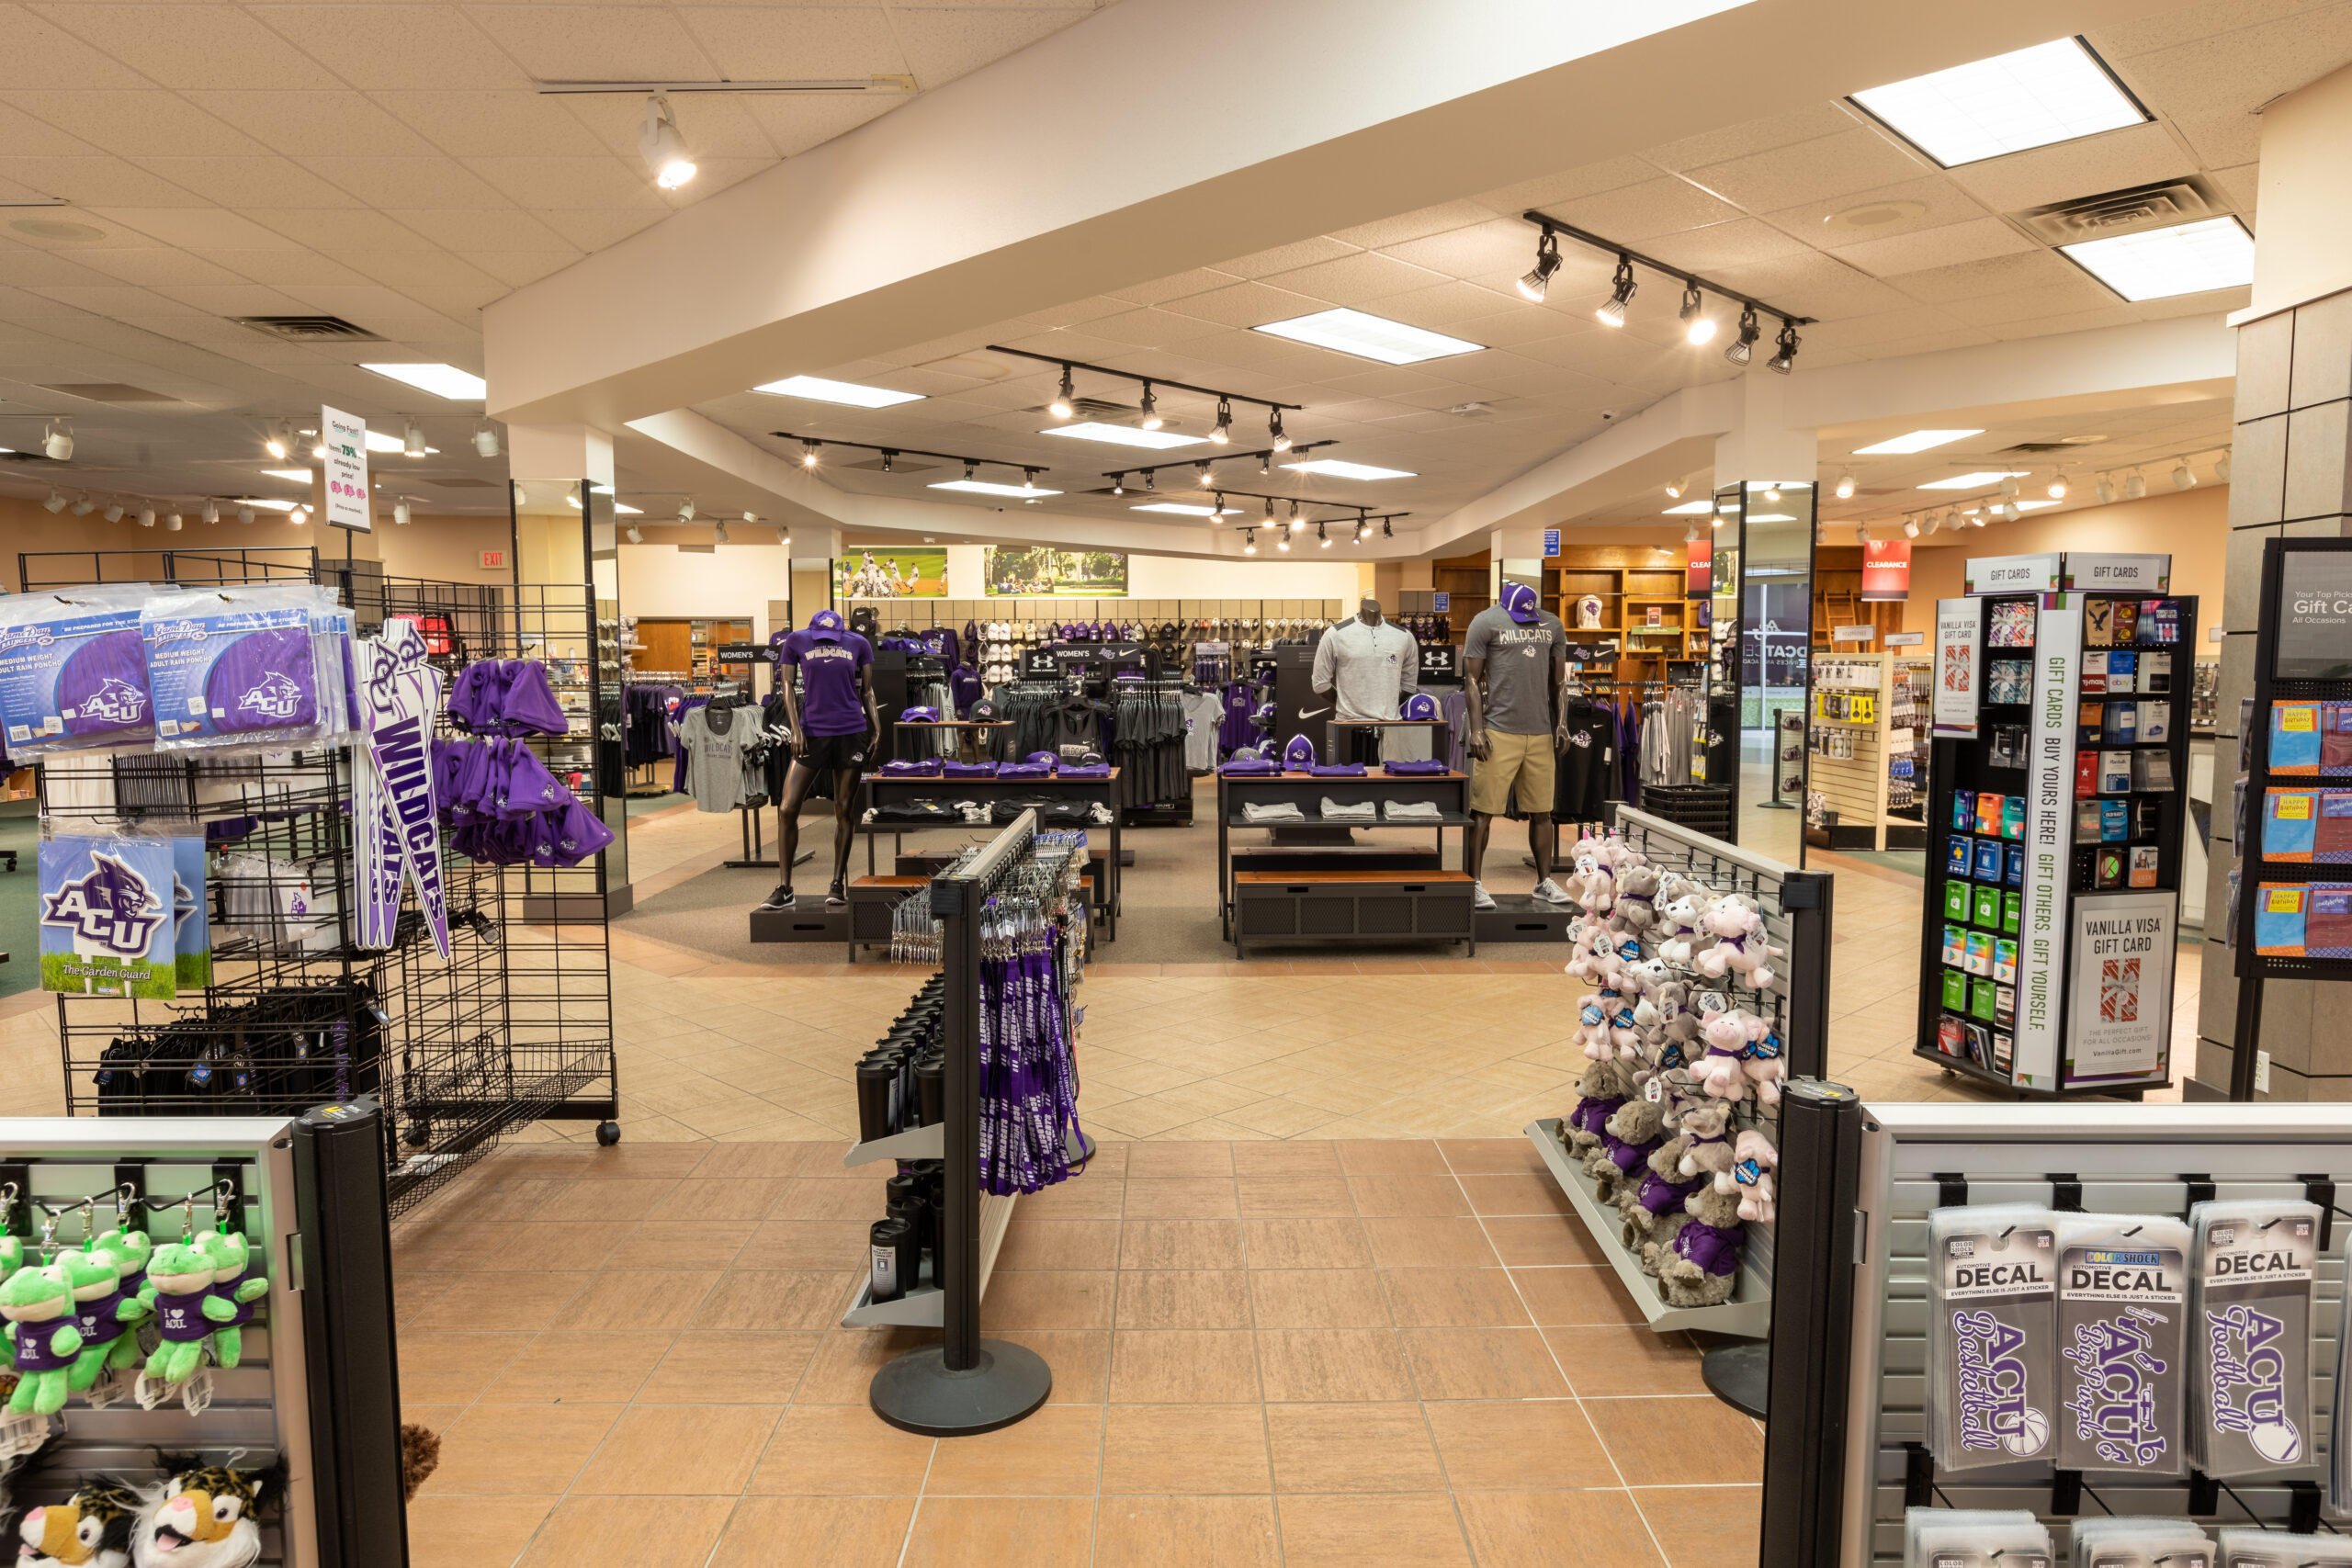 Inside the Campus Store